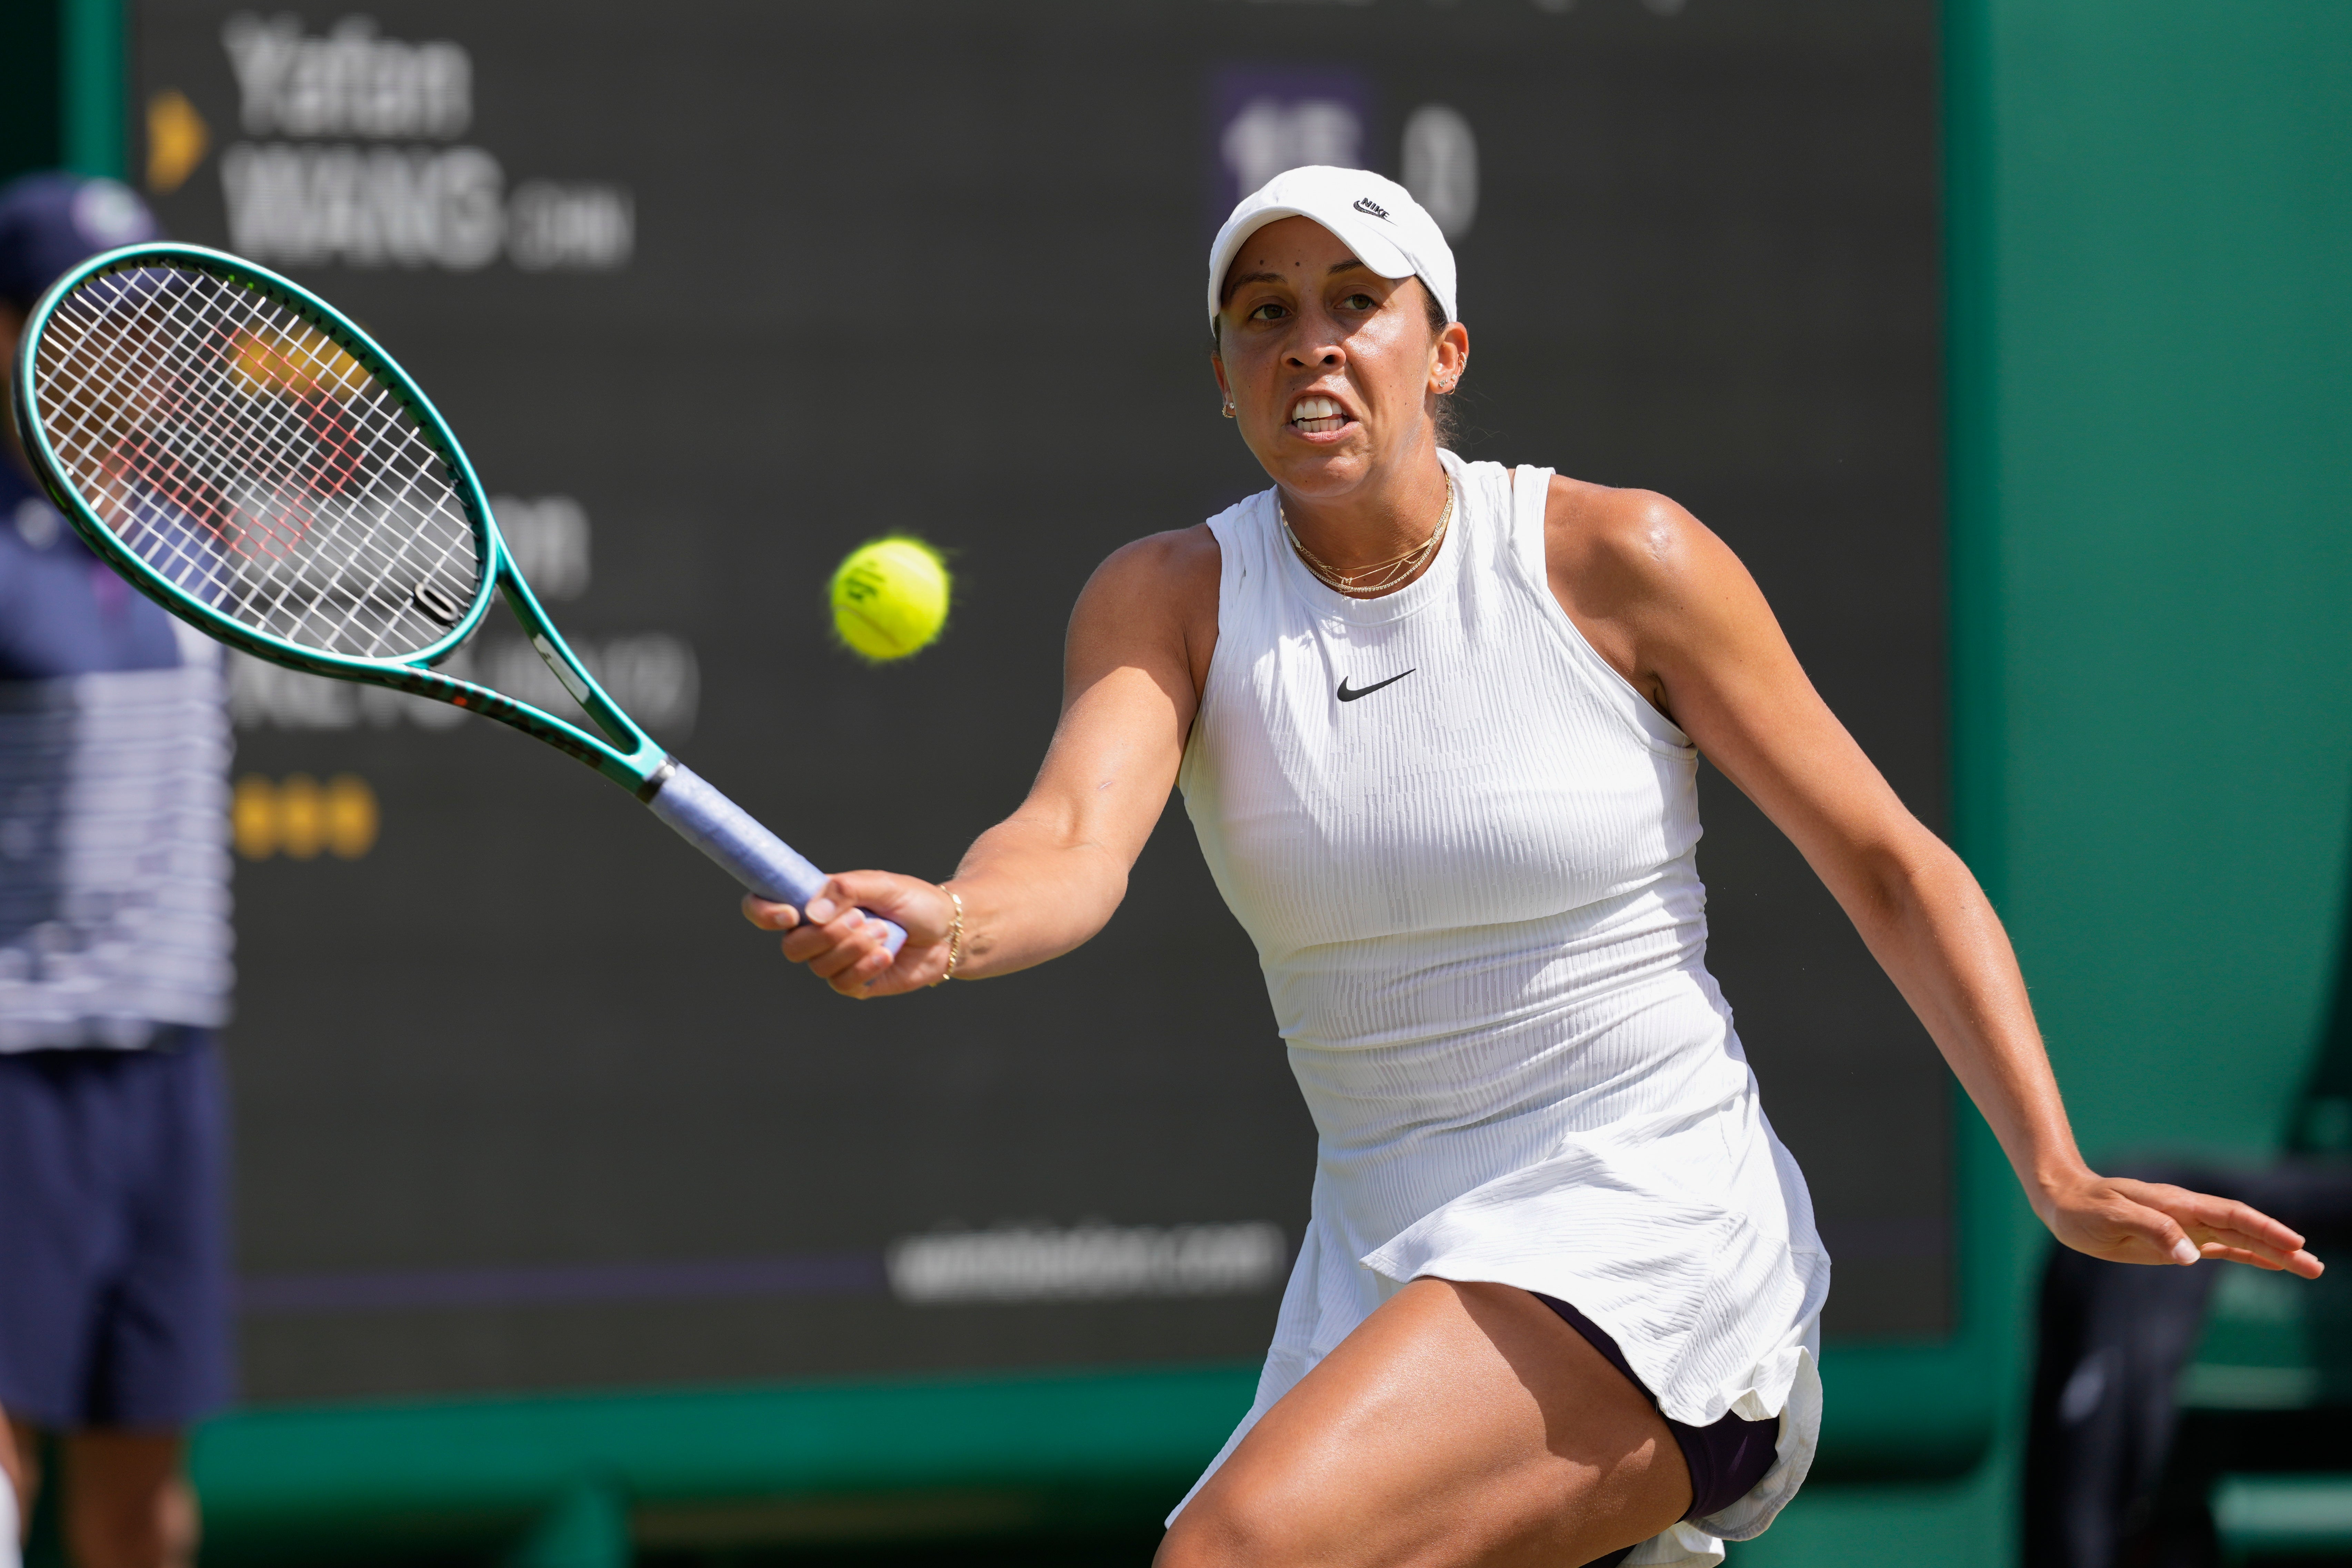 Madison Keys is the 12th seed at Wimbledon